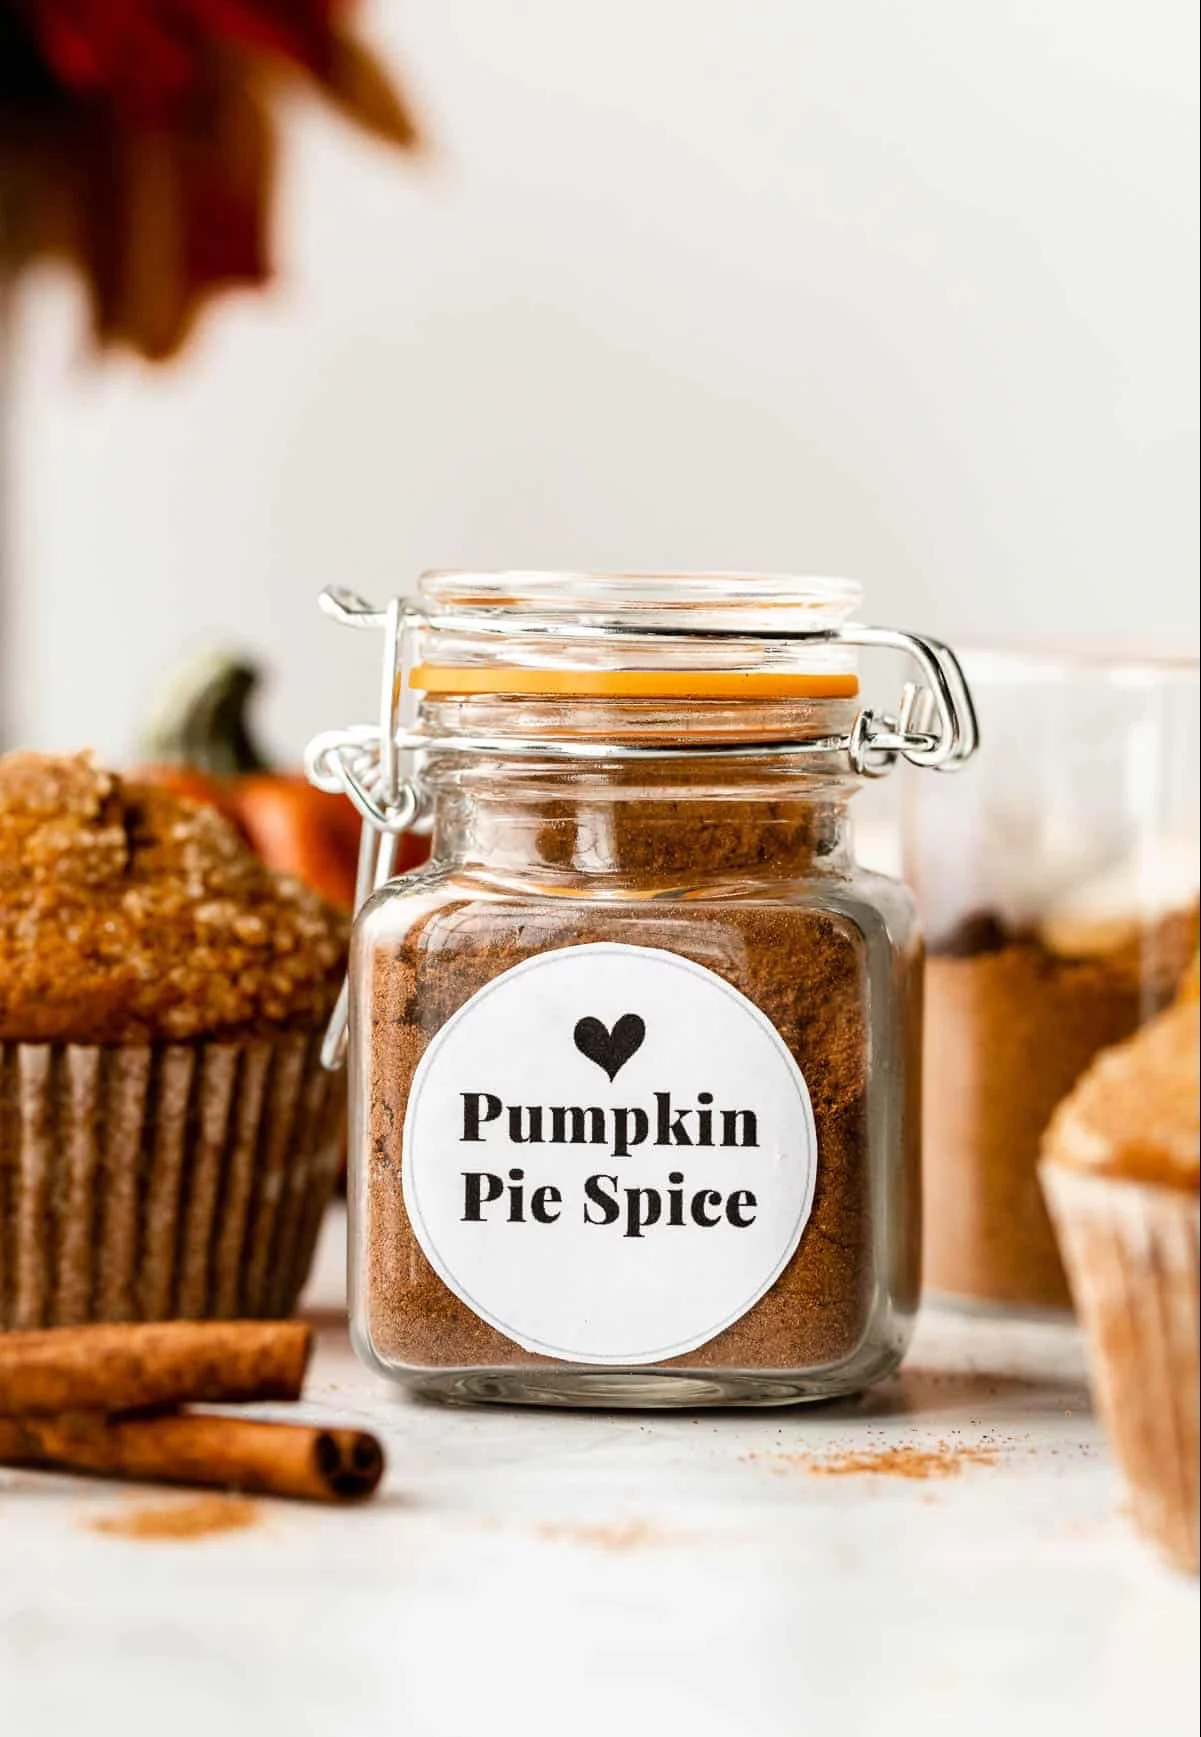 is pumpkin pie spice good for you